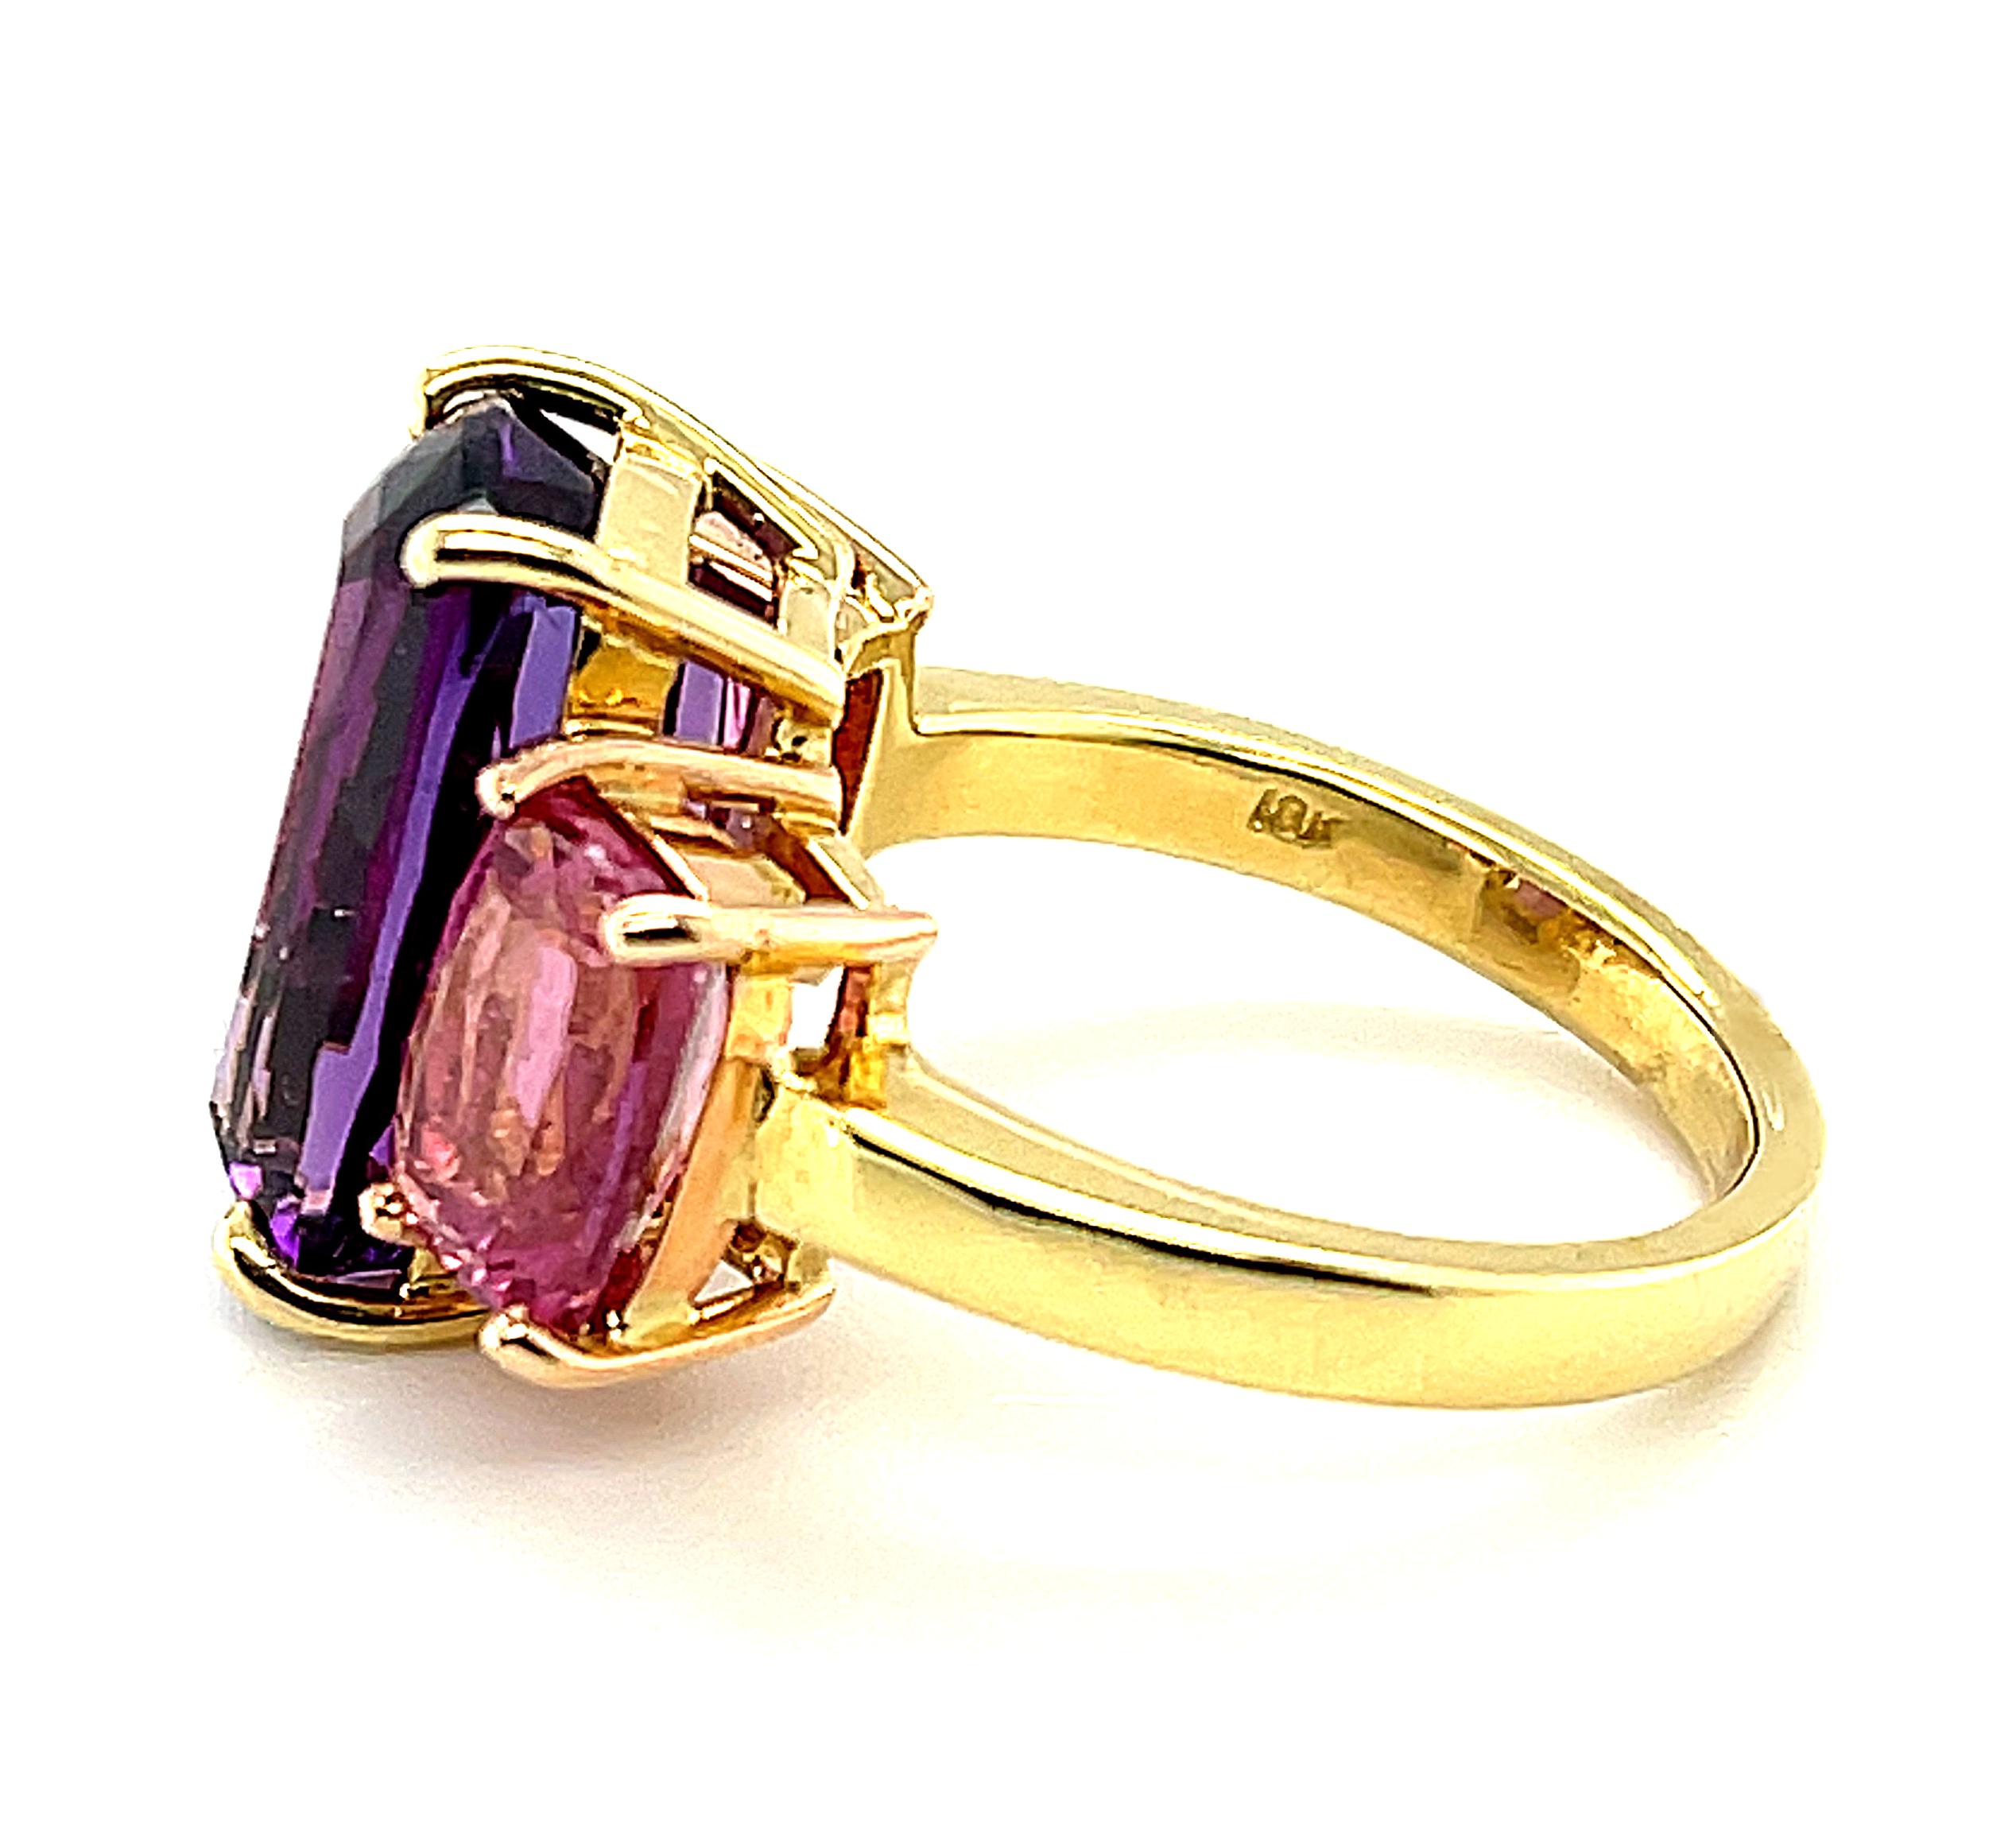 Cushion Cut 6.32 ct. Amethyst and Pink Tourmaline Three-Stone Ring in Rose and White Gold For Sale